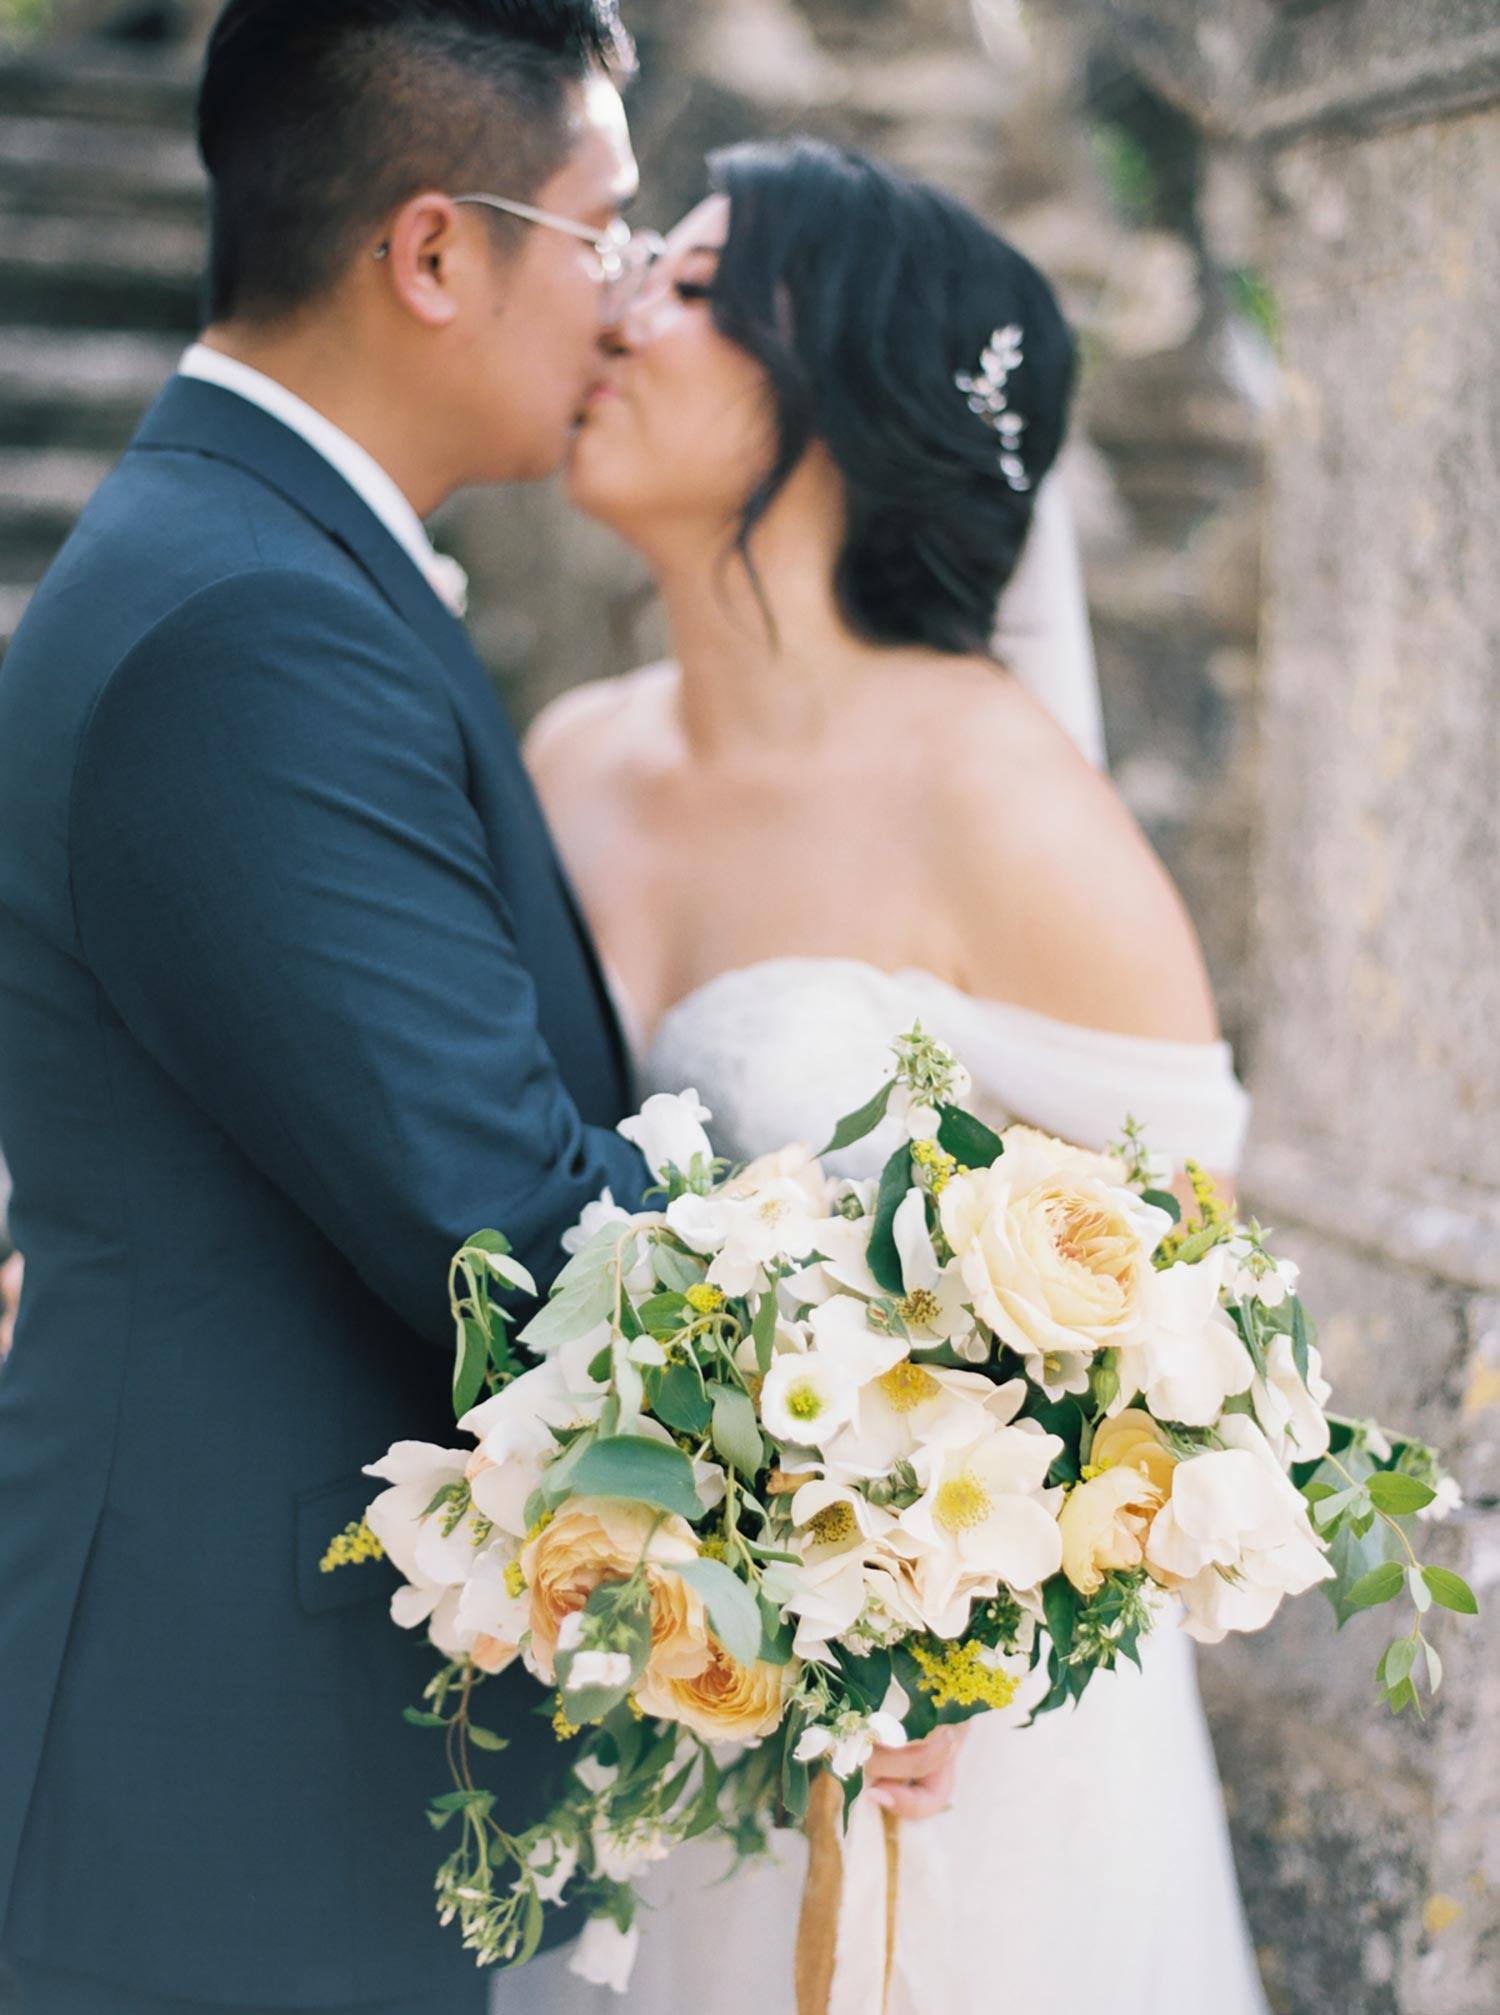 historic Italian villa with old stone staircase and bride in an off-the-shoulder embroidered tulle wedding dress kissing groom in a navy groom suit while she holds a yellow and white garden bridal bouquet